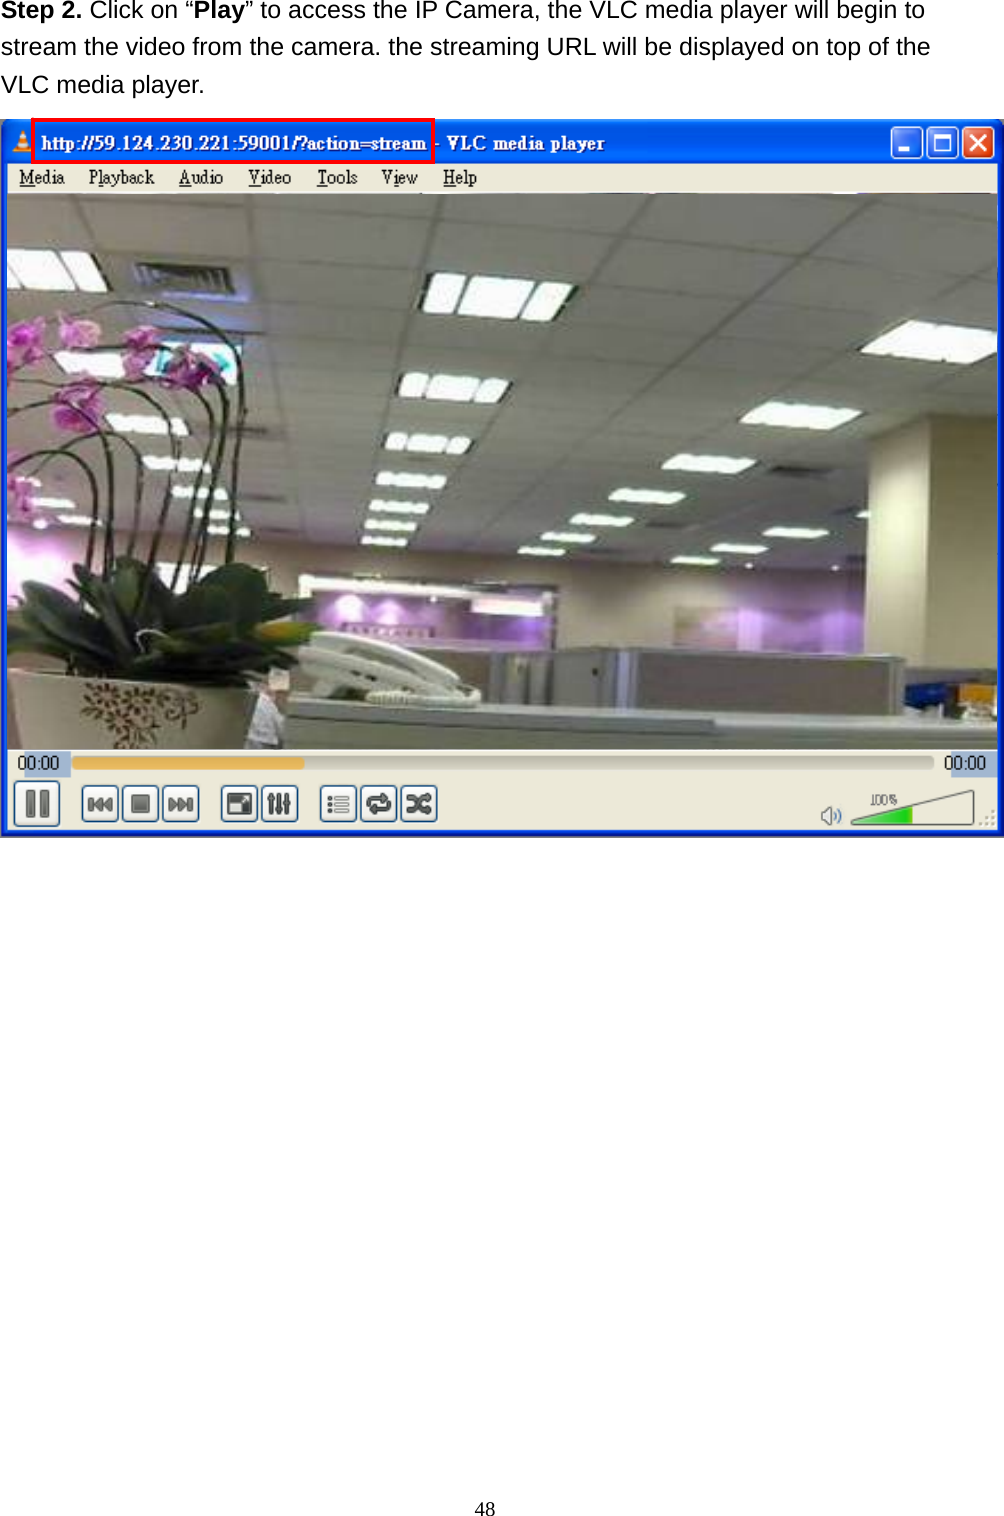 48  Step 2. Click on “Play” to access the IP Camera, the VLC media player will begin to stream the video from the camera. the streaming URL will be displayed on top of the VLC media player.    